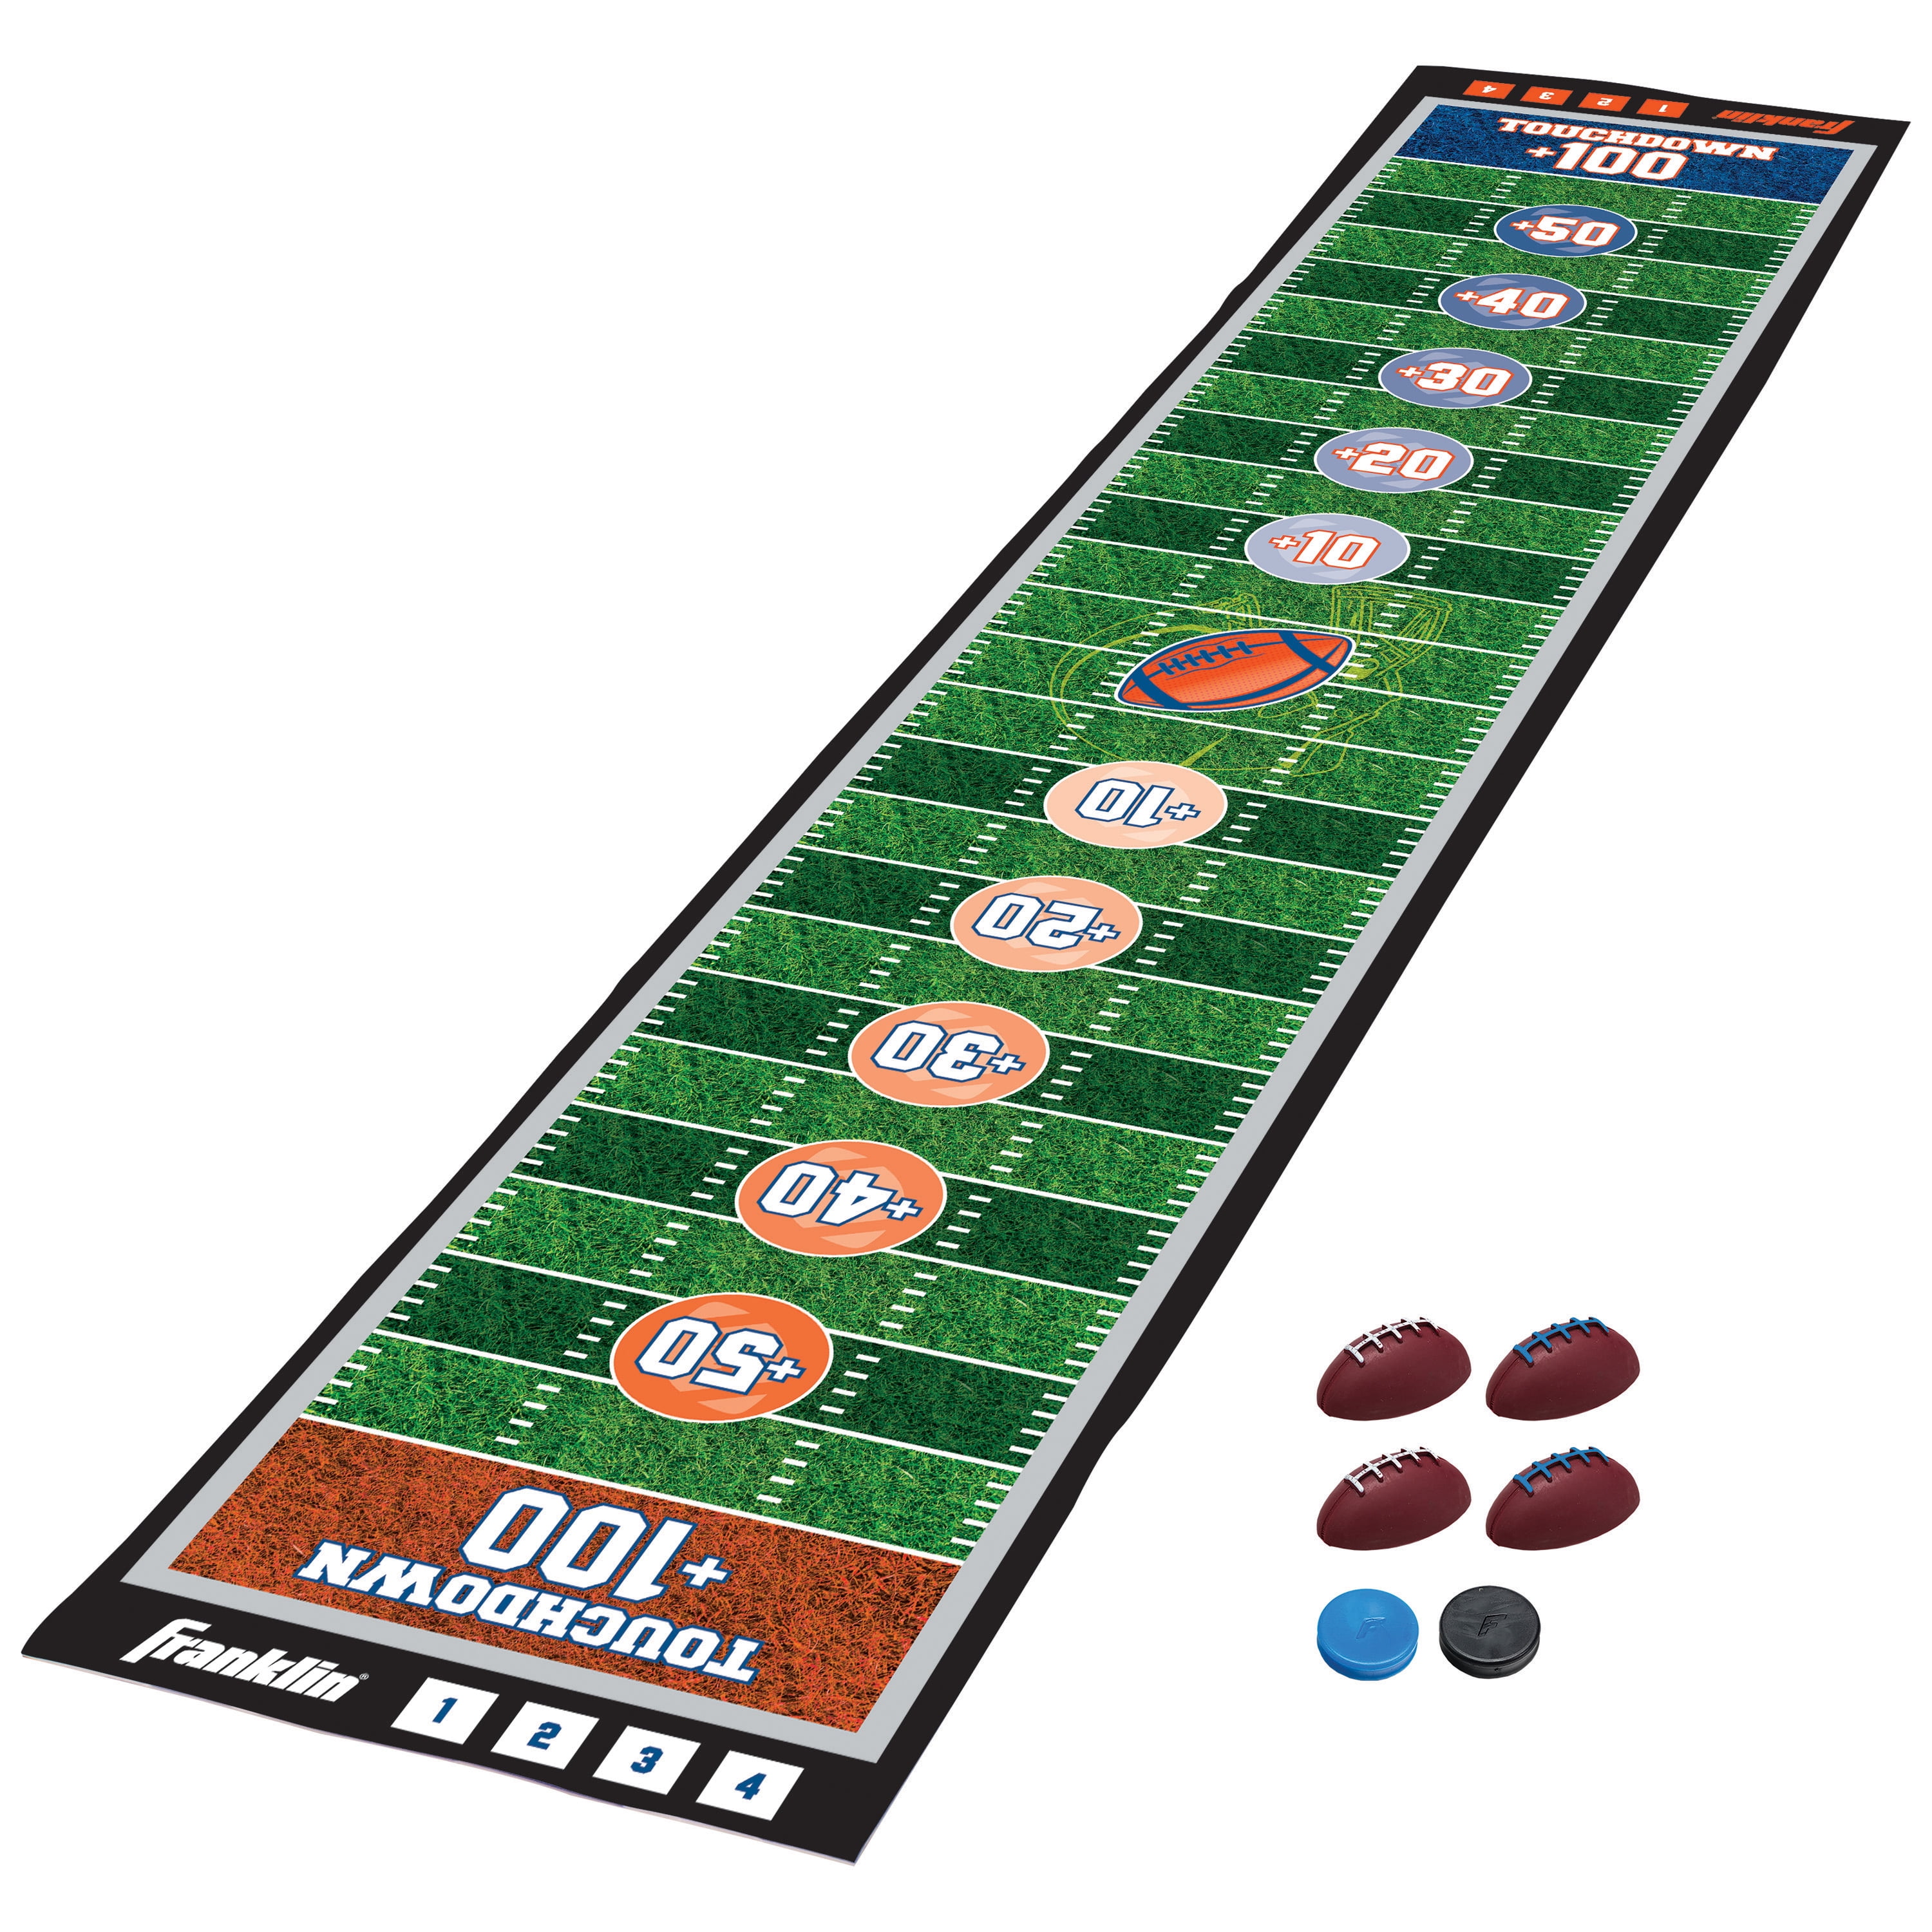 Franklin Sports 20In Table Games Table Top Mini Game Perfect for Family Game Room Fun Built-in Scoring for Kid Friendly Fun! 